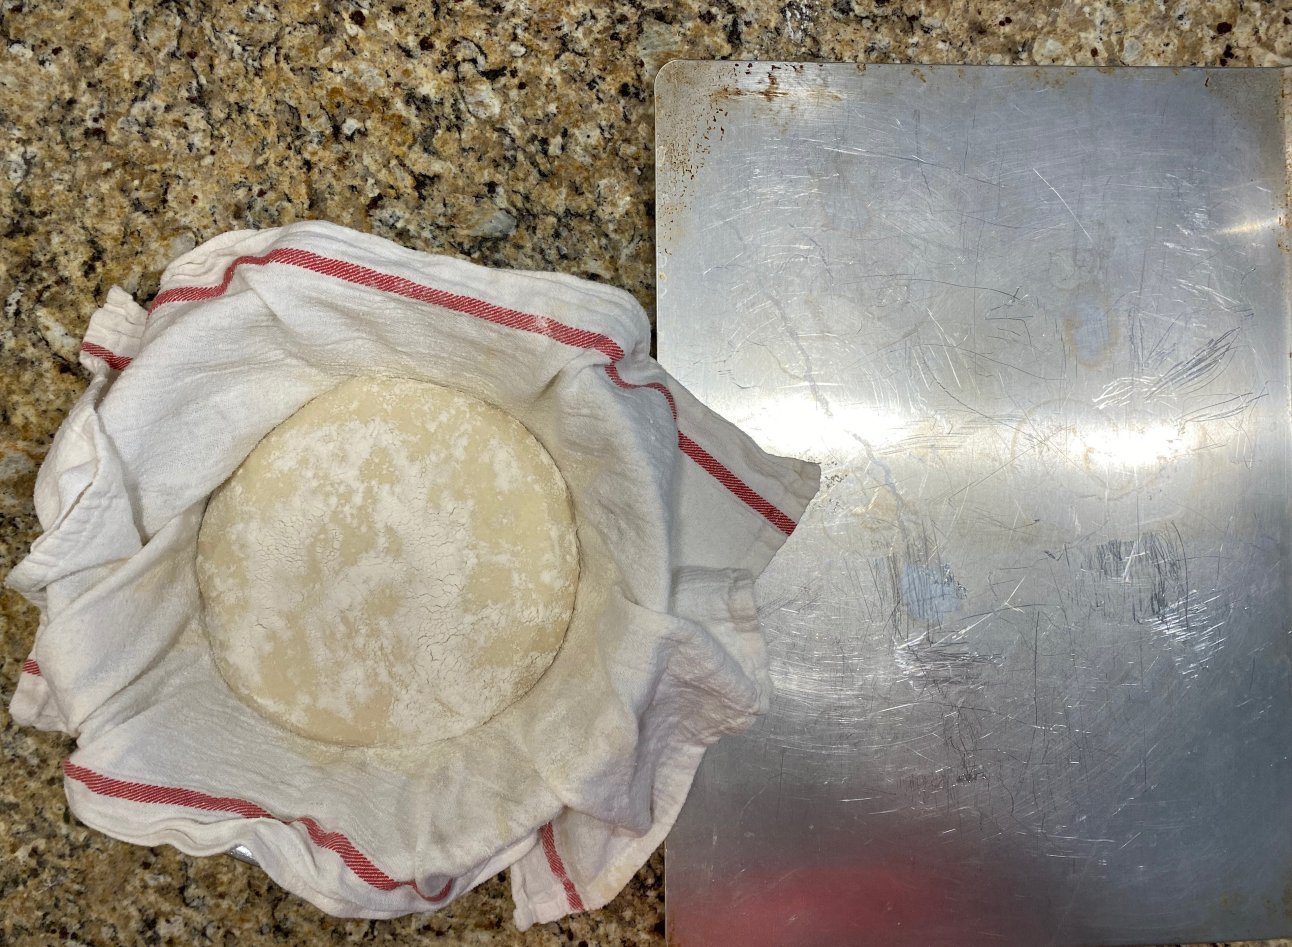 Sheet pan and dough in bowl unwrapped